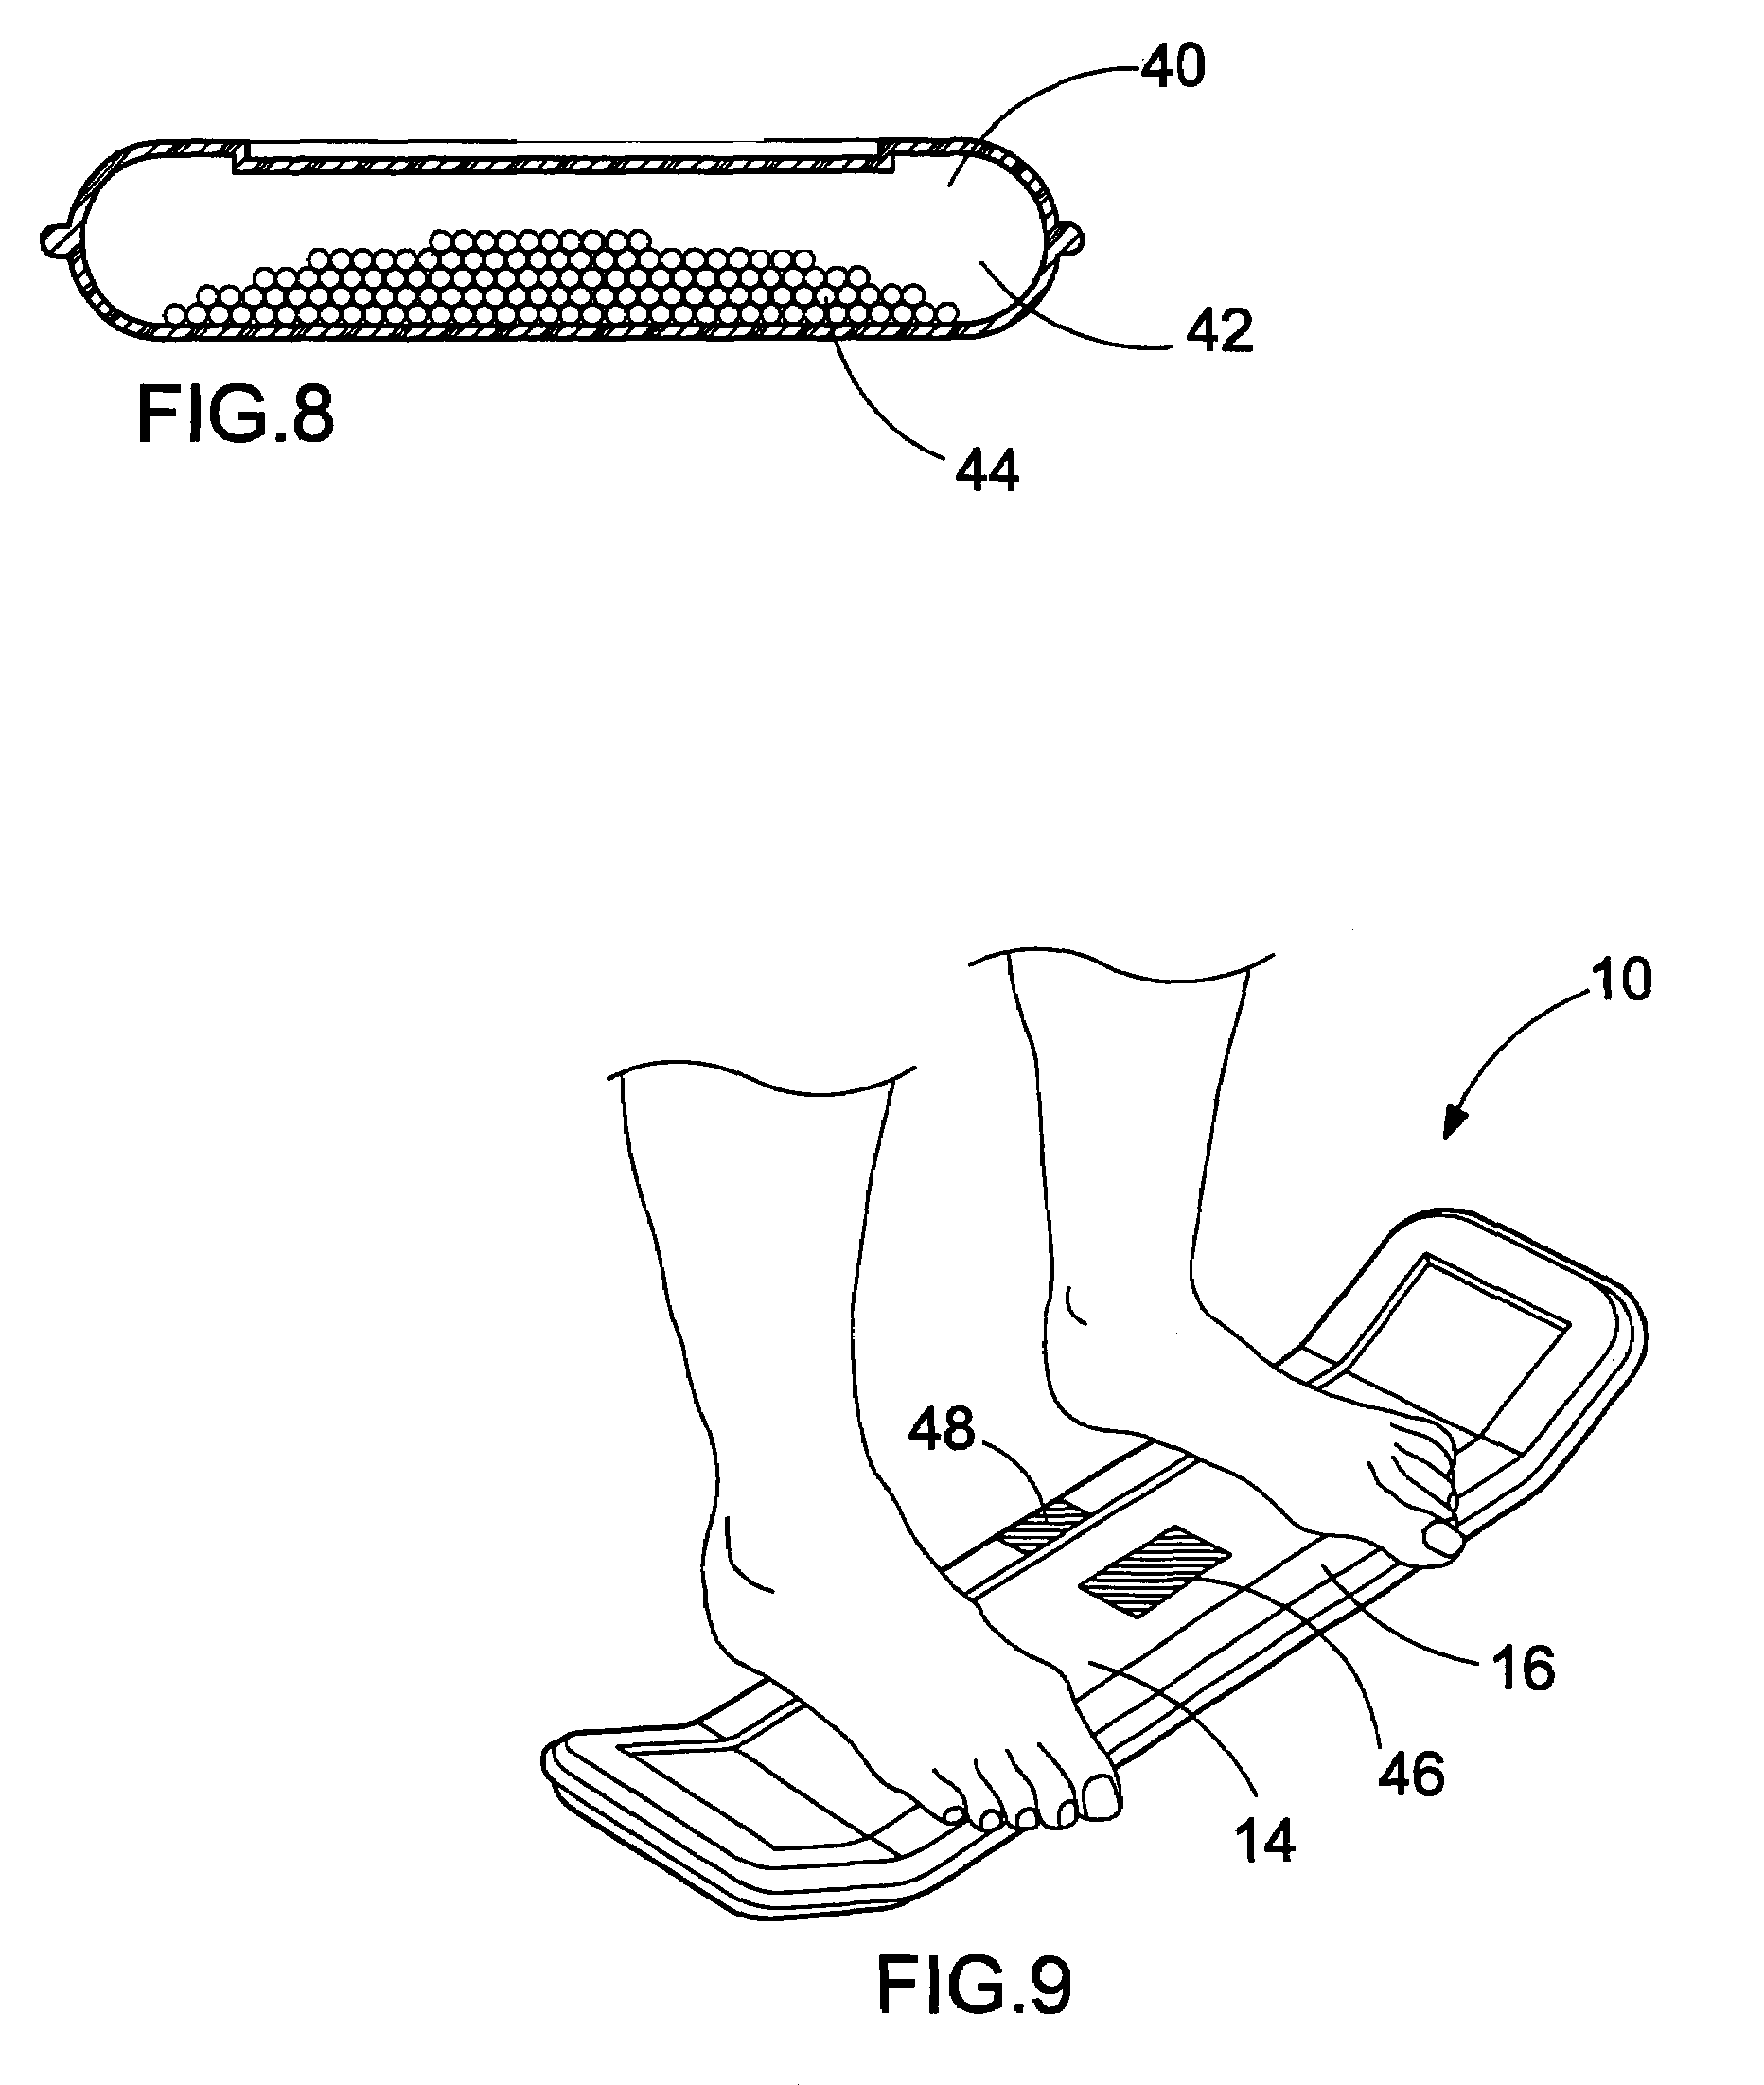 Practice device to enable children to simulate skateboarding